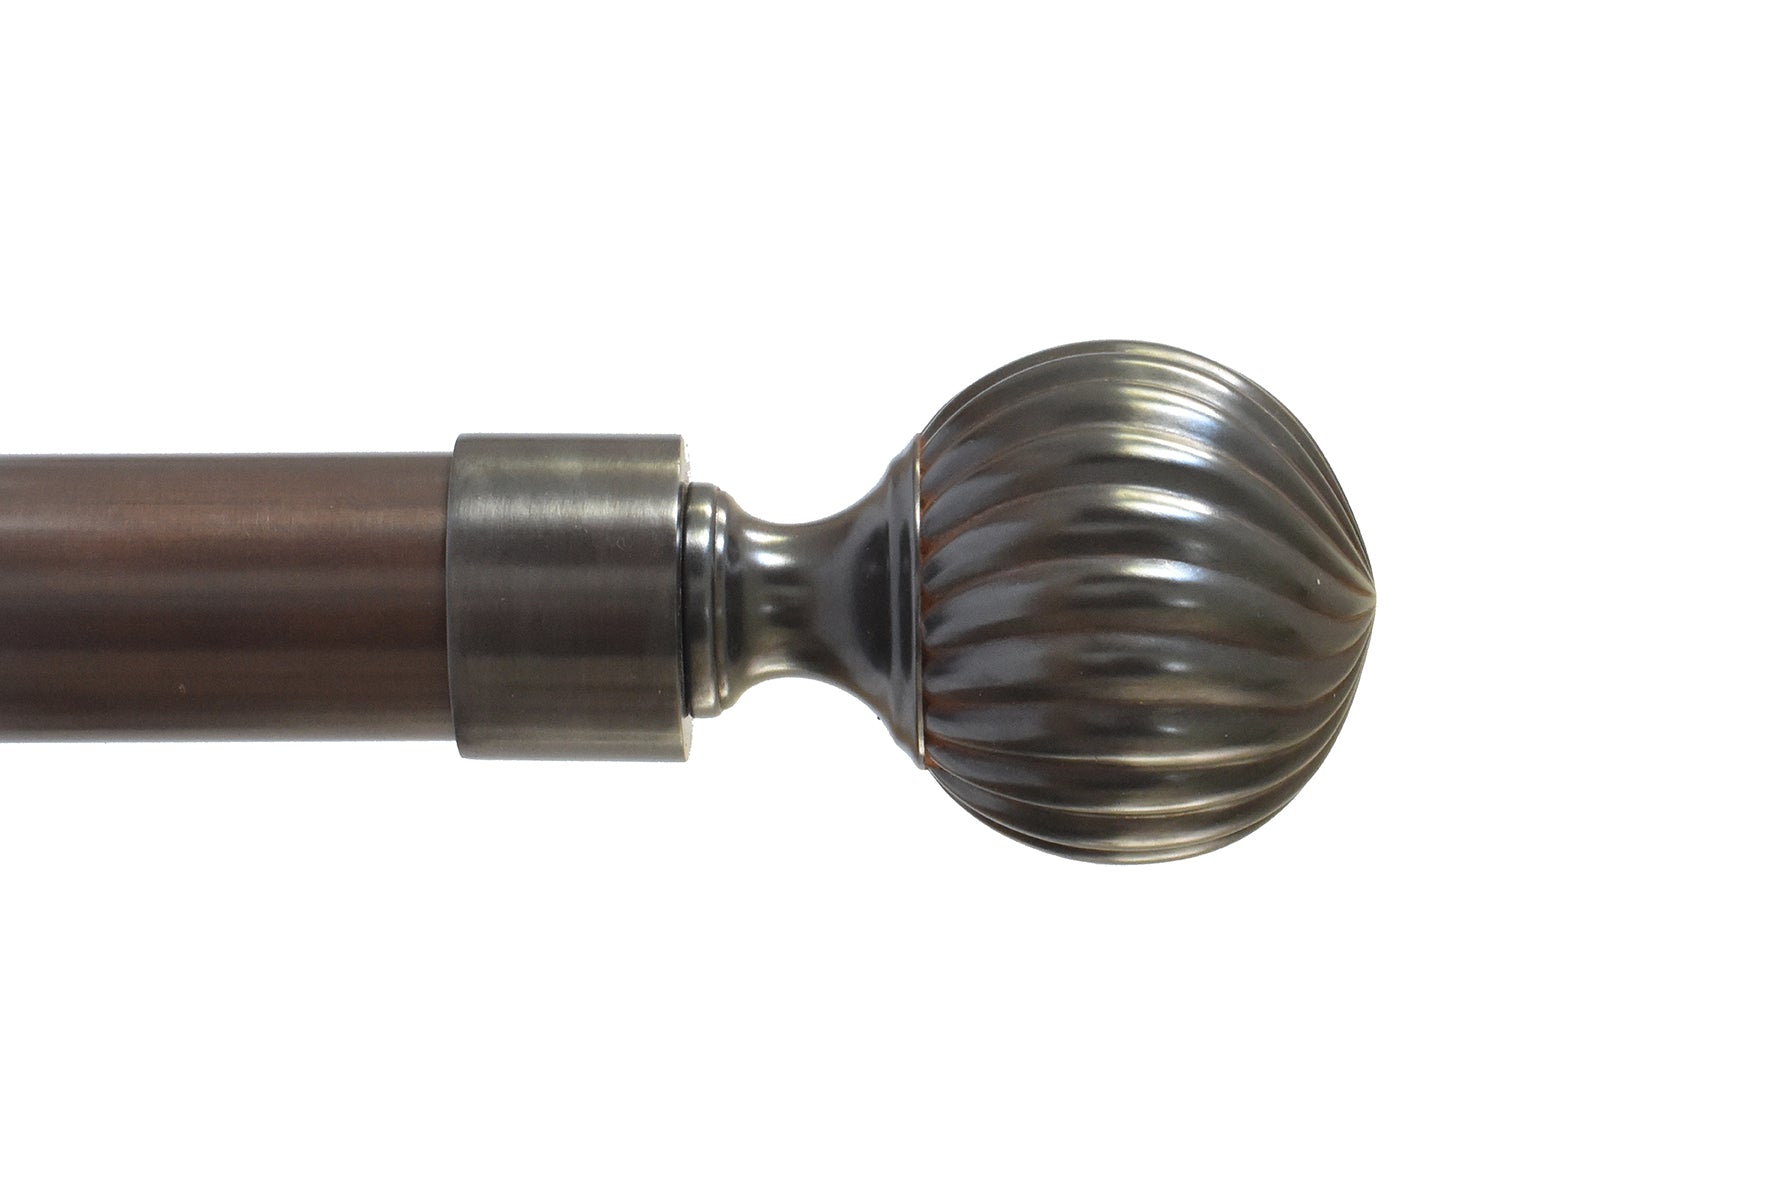 Tillys Classic Twisted Ball Finial Curtain Pole Set in Bronze